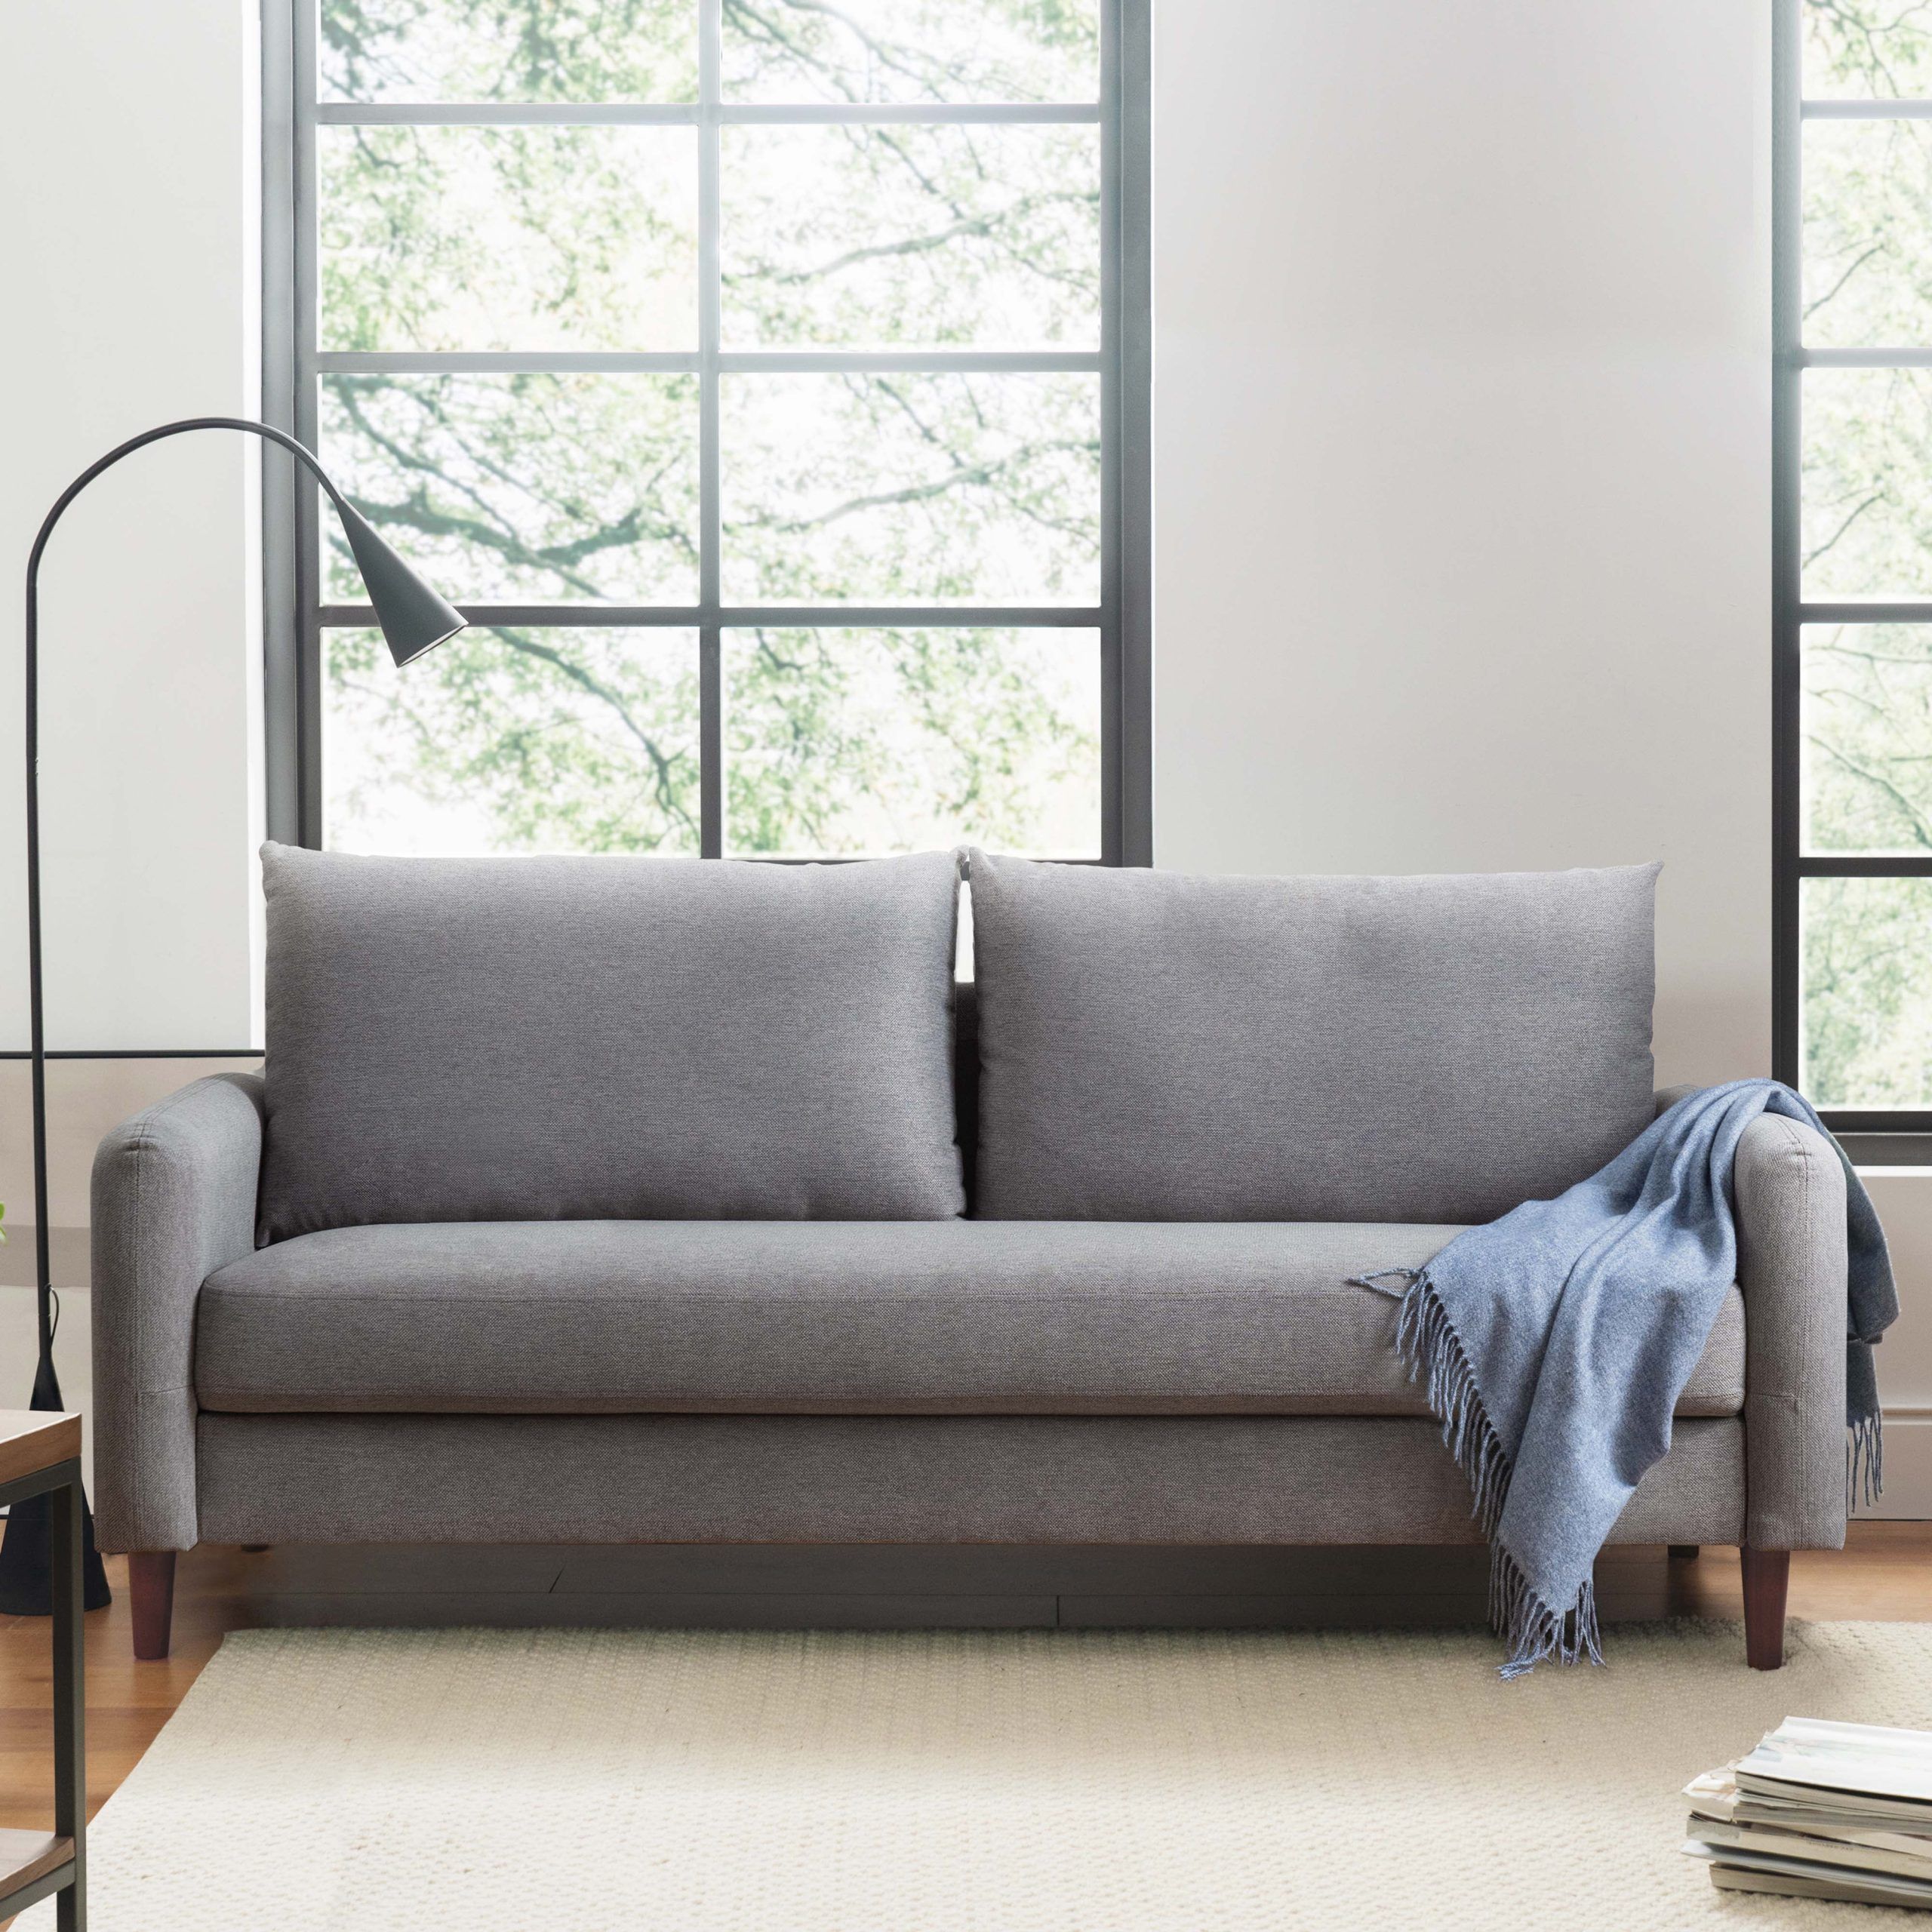 Mellow Mae Mid Century Modern Sofa With Curved Arms, Light Grey –  Walmart Regarding Sofas With Curved Arms (View 14 of 15)